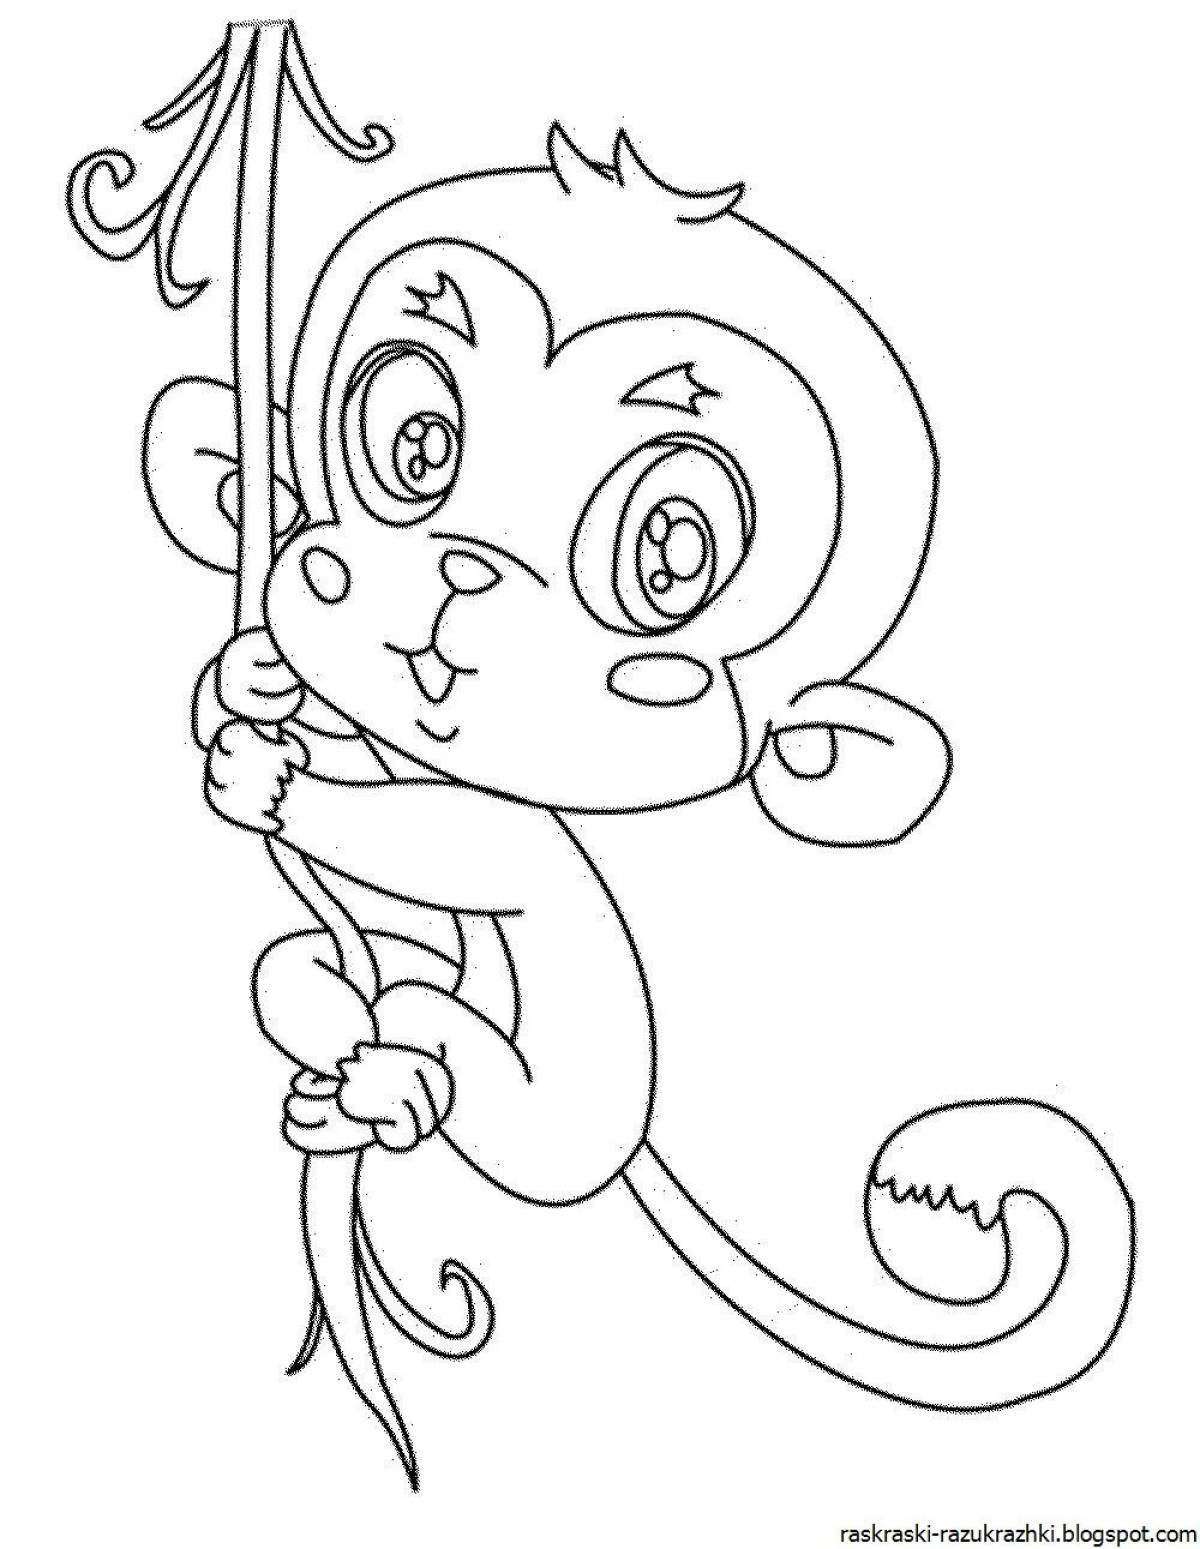 Glitter monkey figurine coloring page